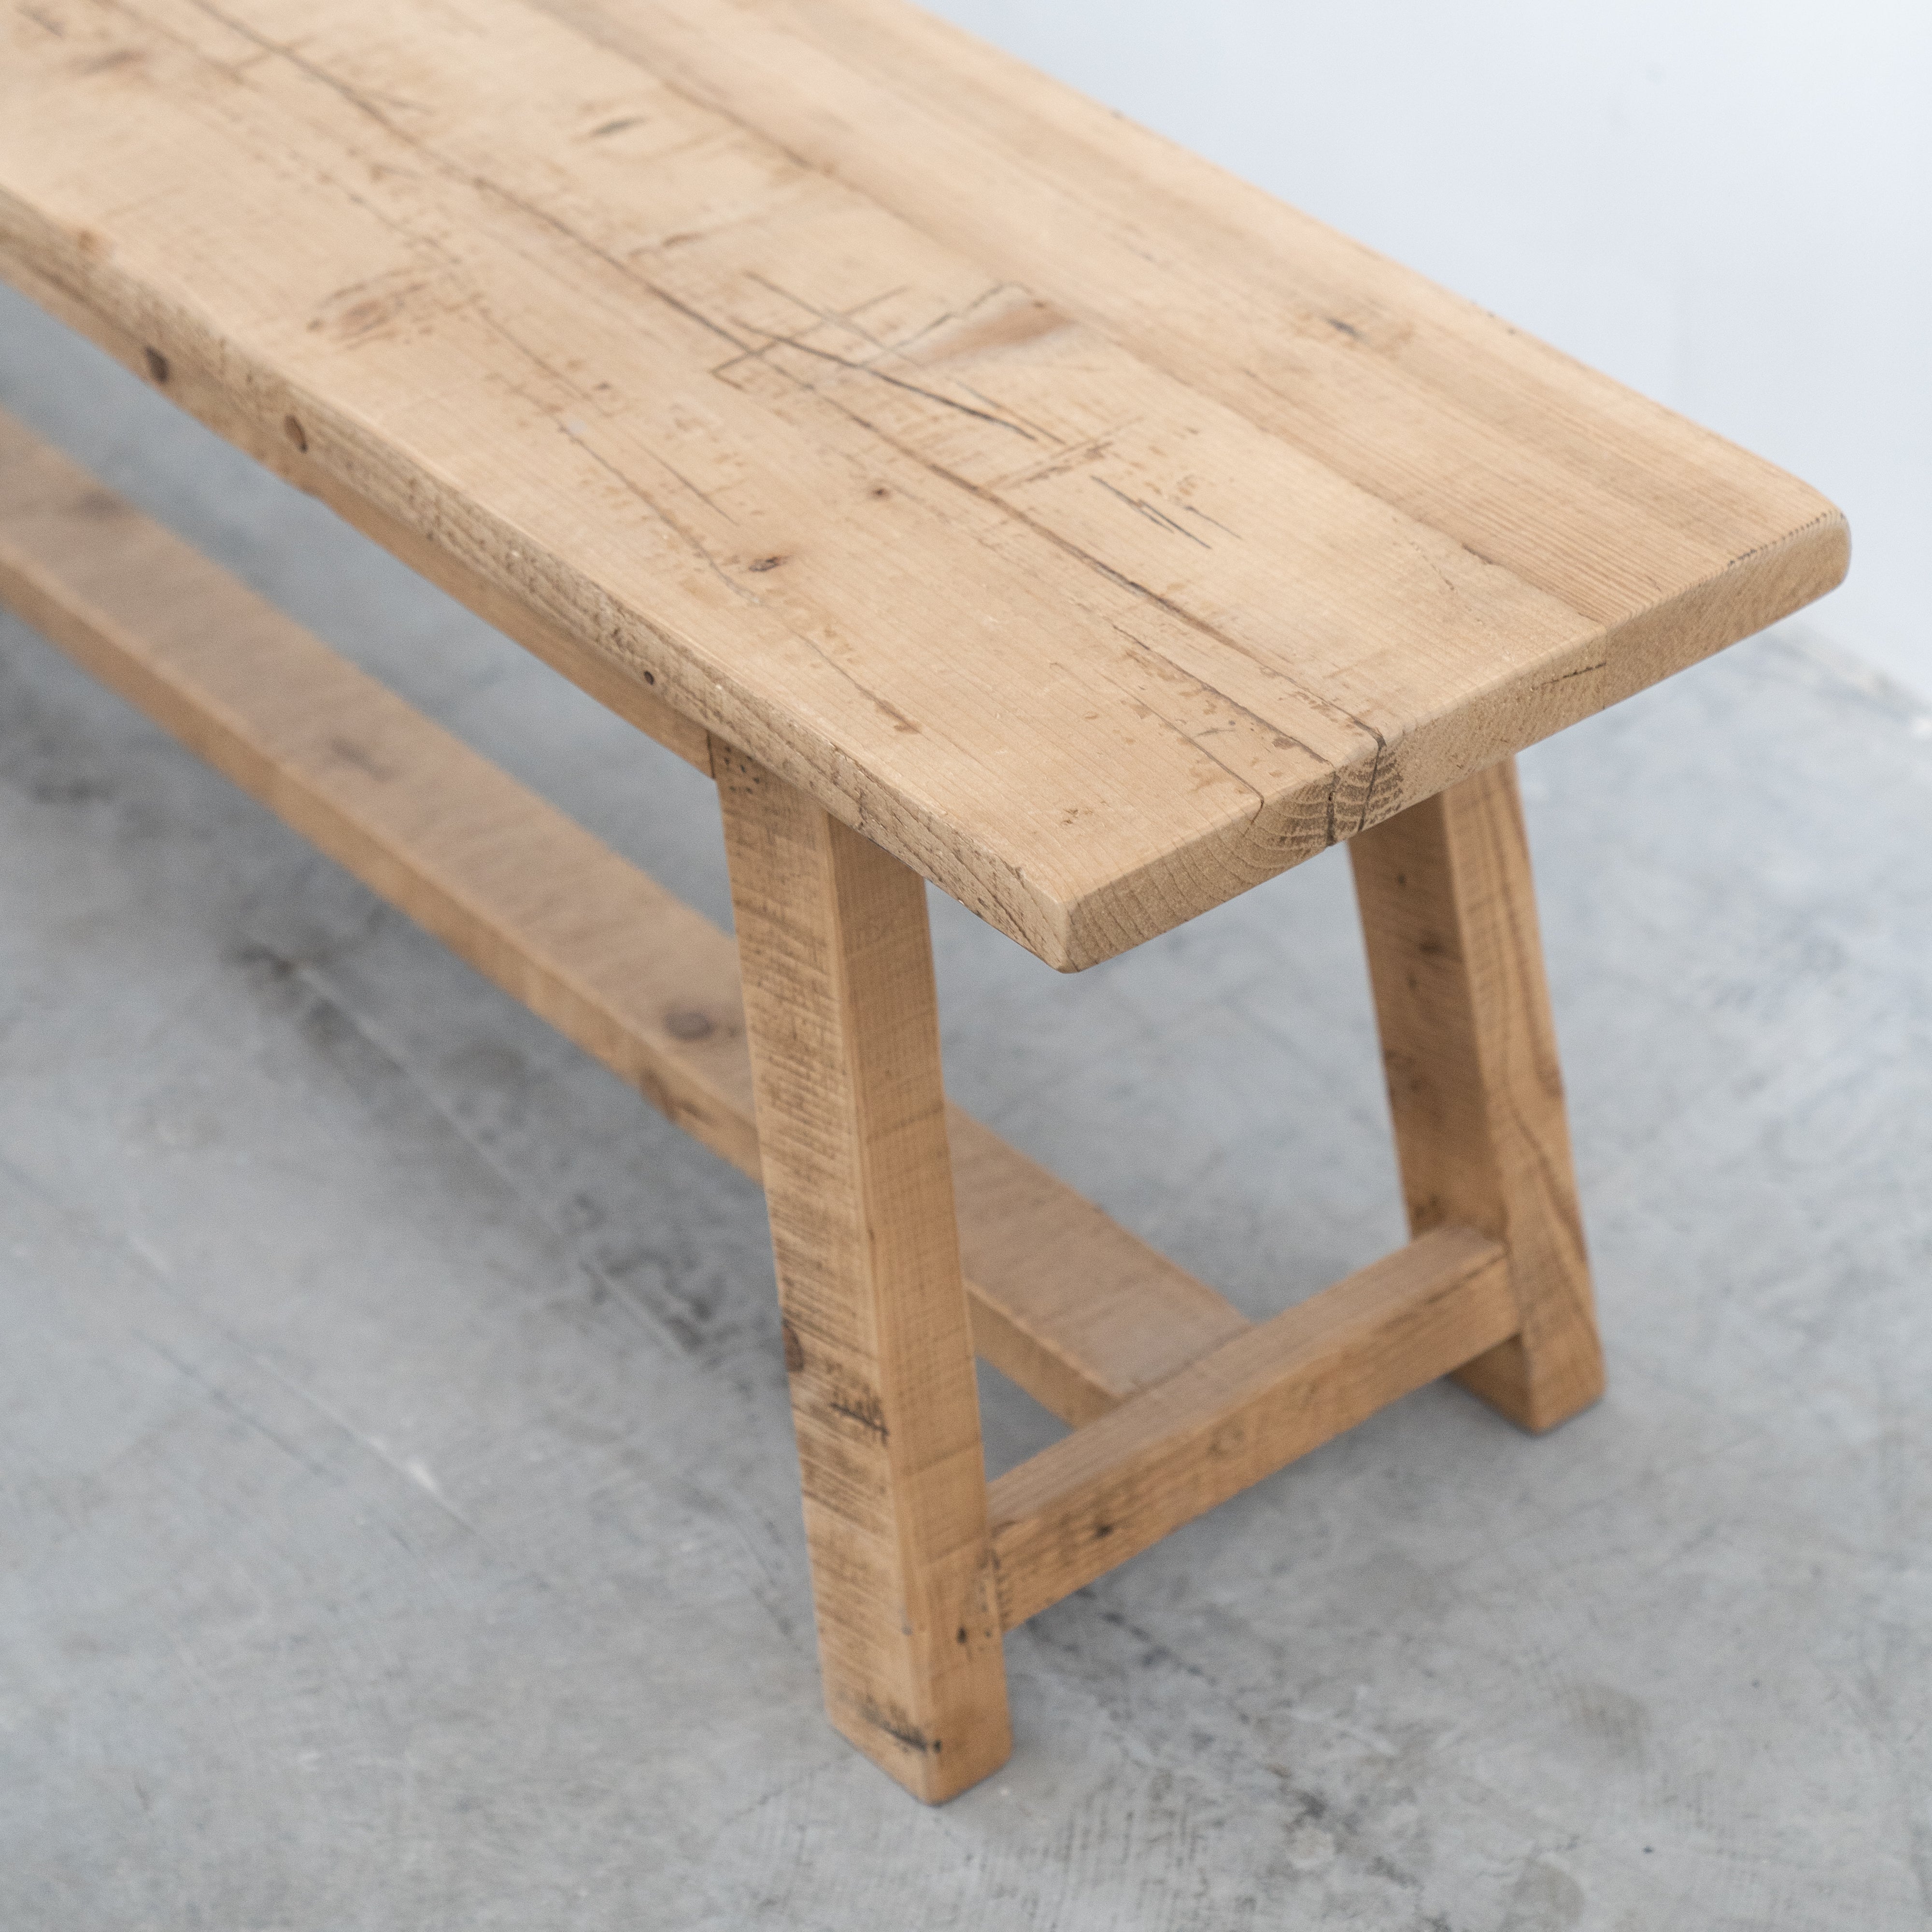 Wooden Bench - Wood and Steel Furnitures